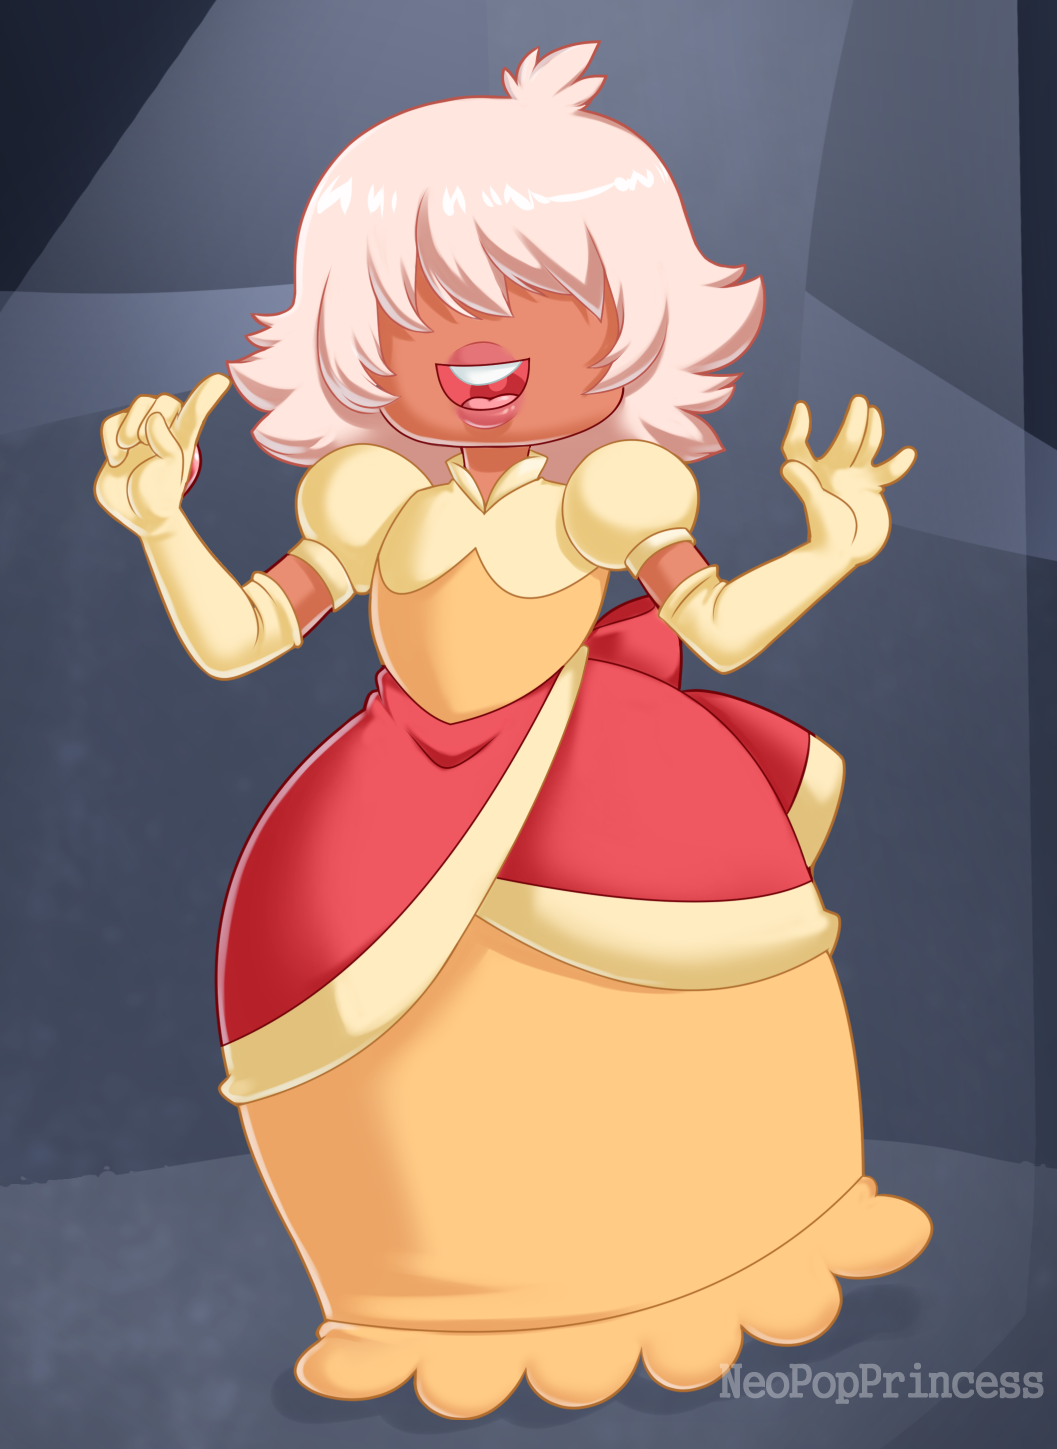 Padparadscha is an absolute adorable ball of cuteness. I love all the new characters that were recently introduced and I want to draw all of them! Mostly though, I’m tempted to draw the new (and...